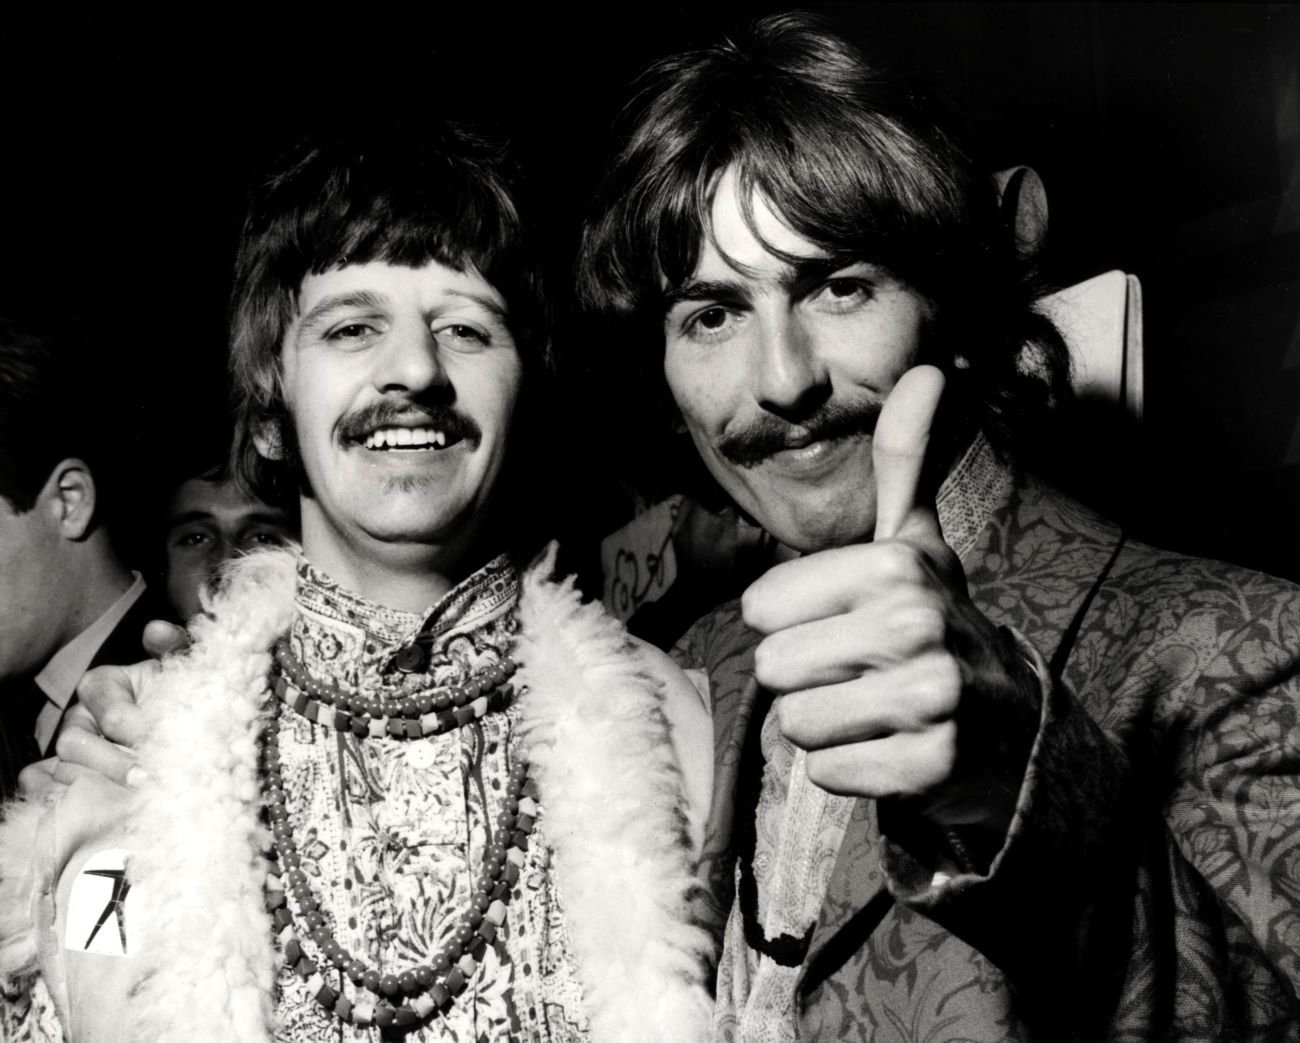 A black and white picture of George Harrison with his hand around Ringo Starr's shoulders, giving a thumbs up.